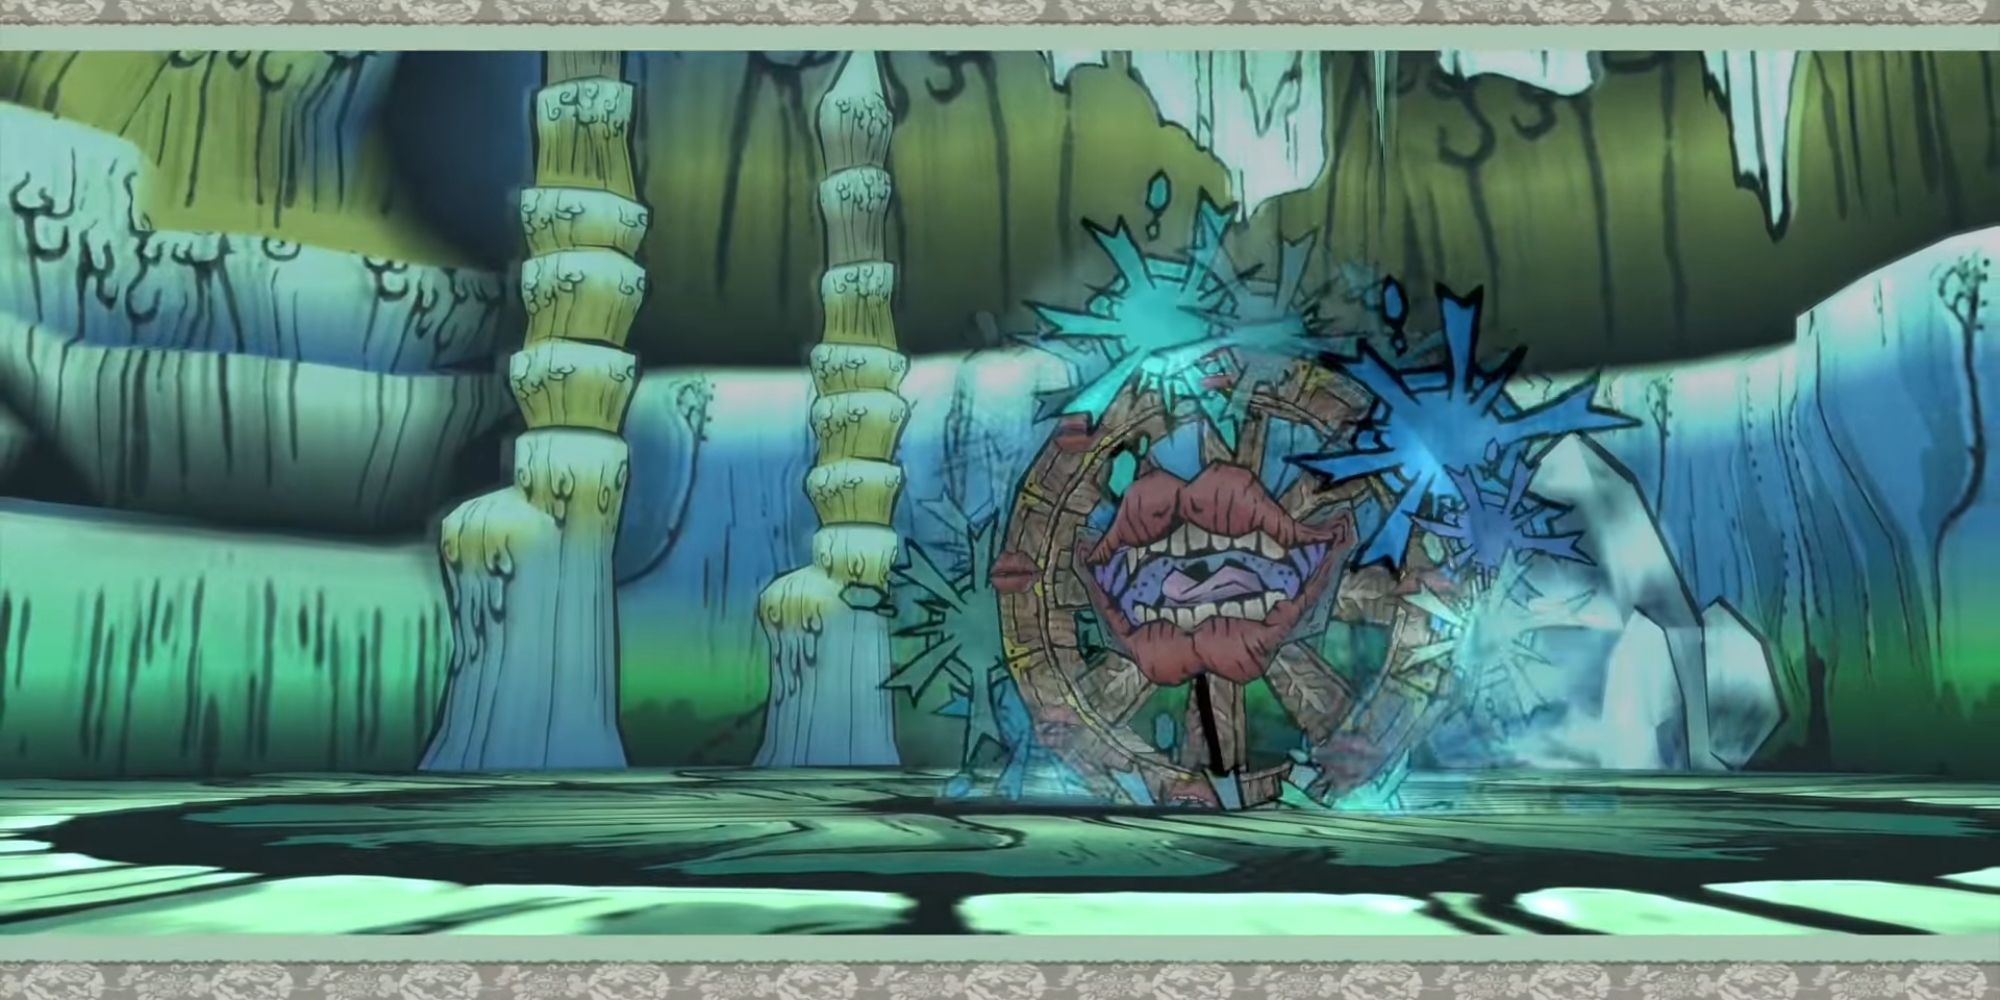 A picture of the demonic enemy "Ice Lips" from the video game Okami